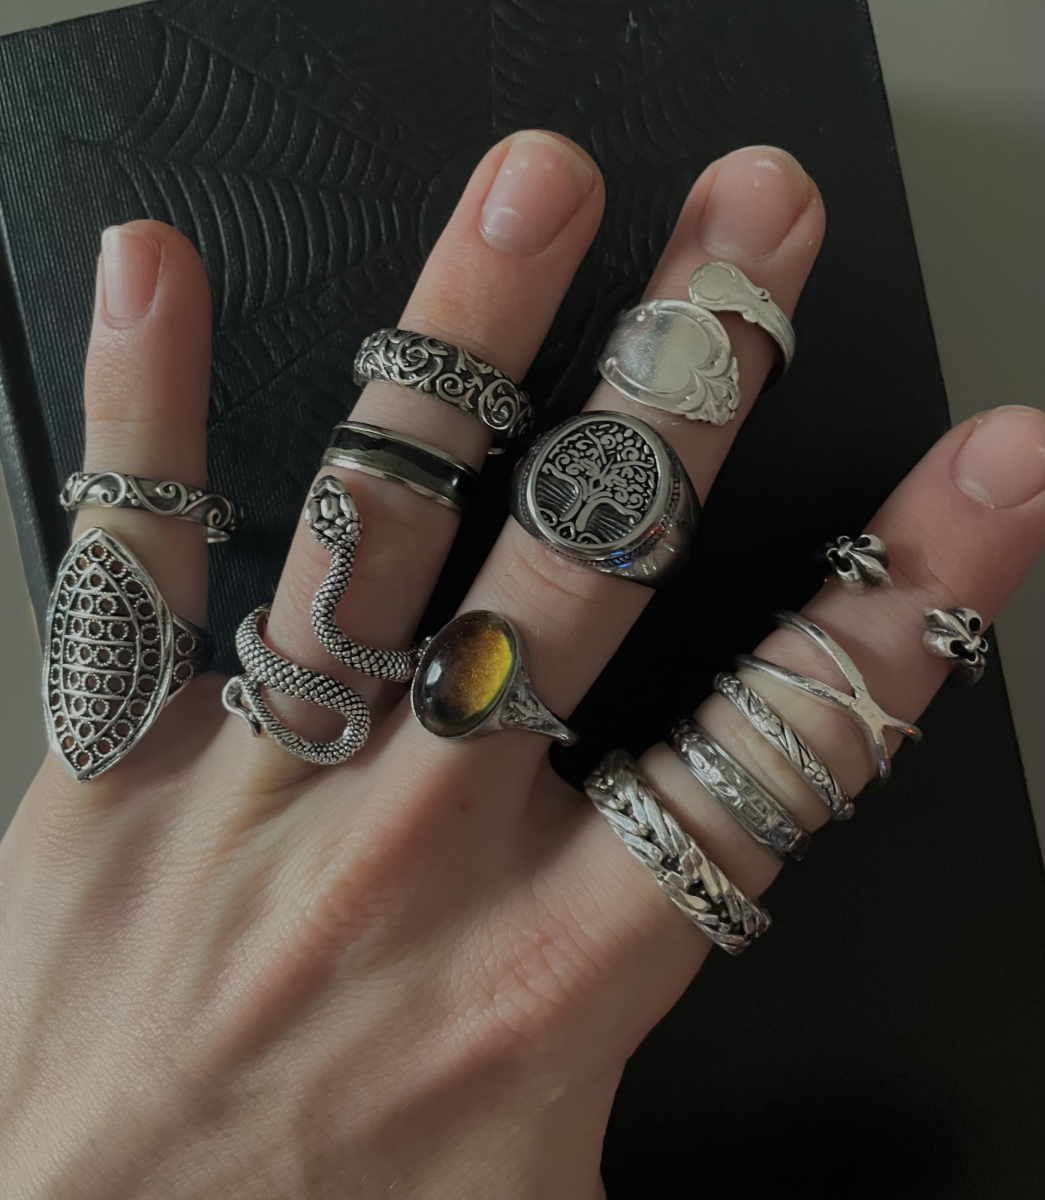 Rings come in all different shapes and sizes and can be used to create more details in outfits.